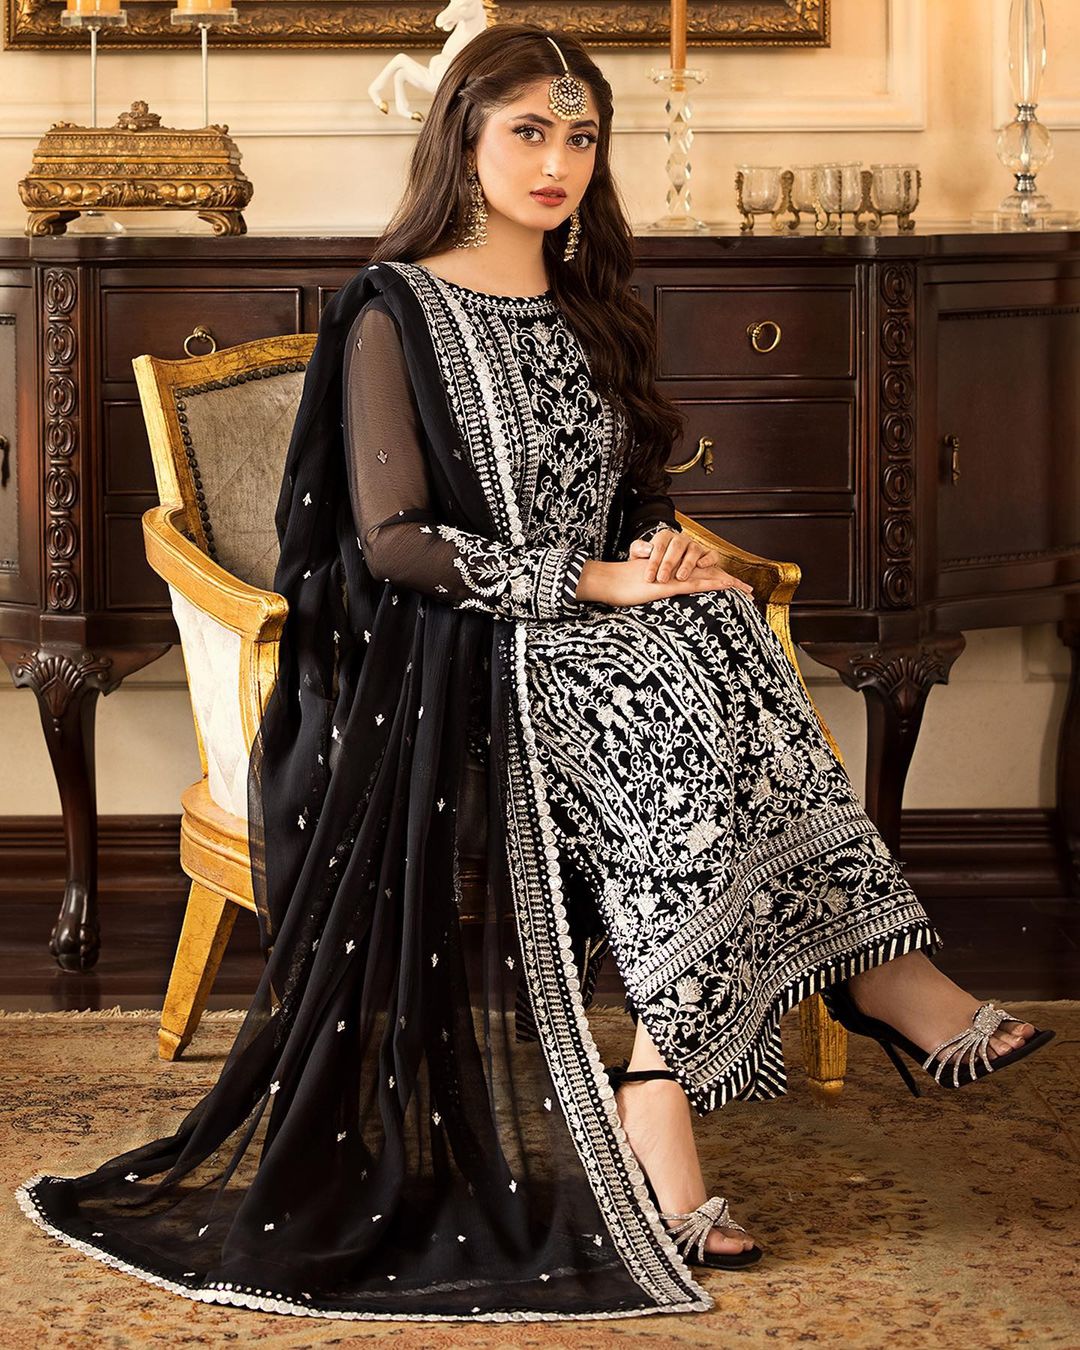 Striking Black Attire Enriched With Exquisite White Embroidery